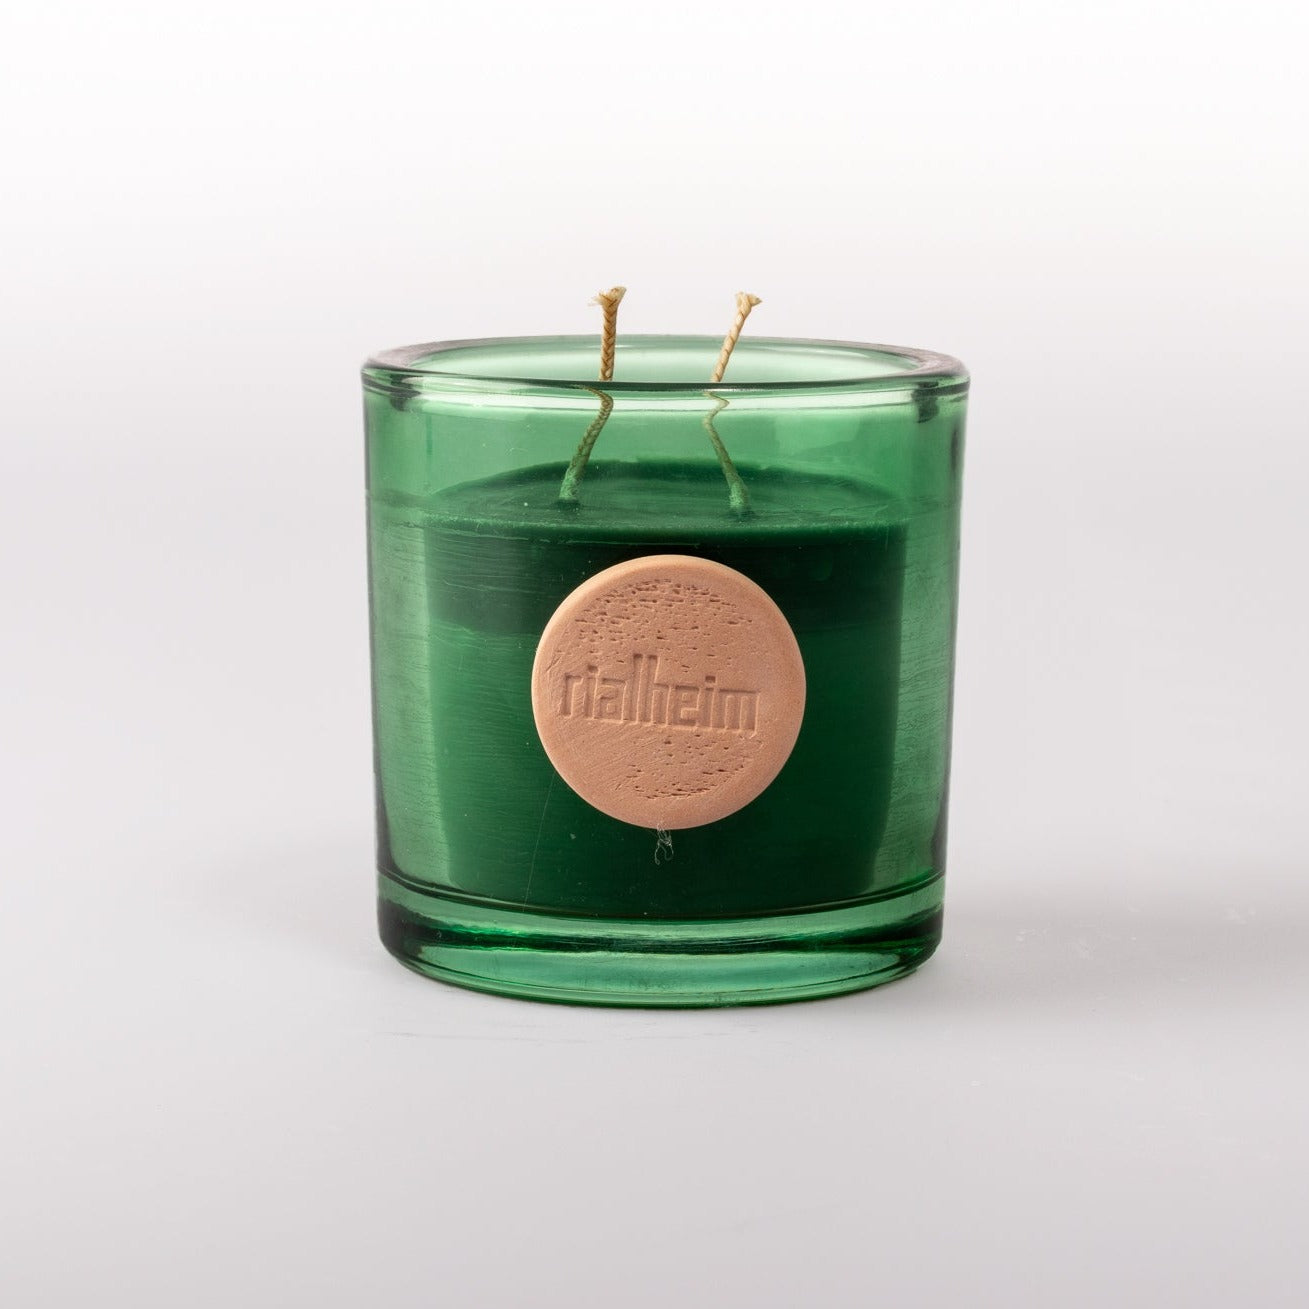 (290g) The Library Scented Candle - Rialheim 